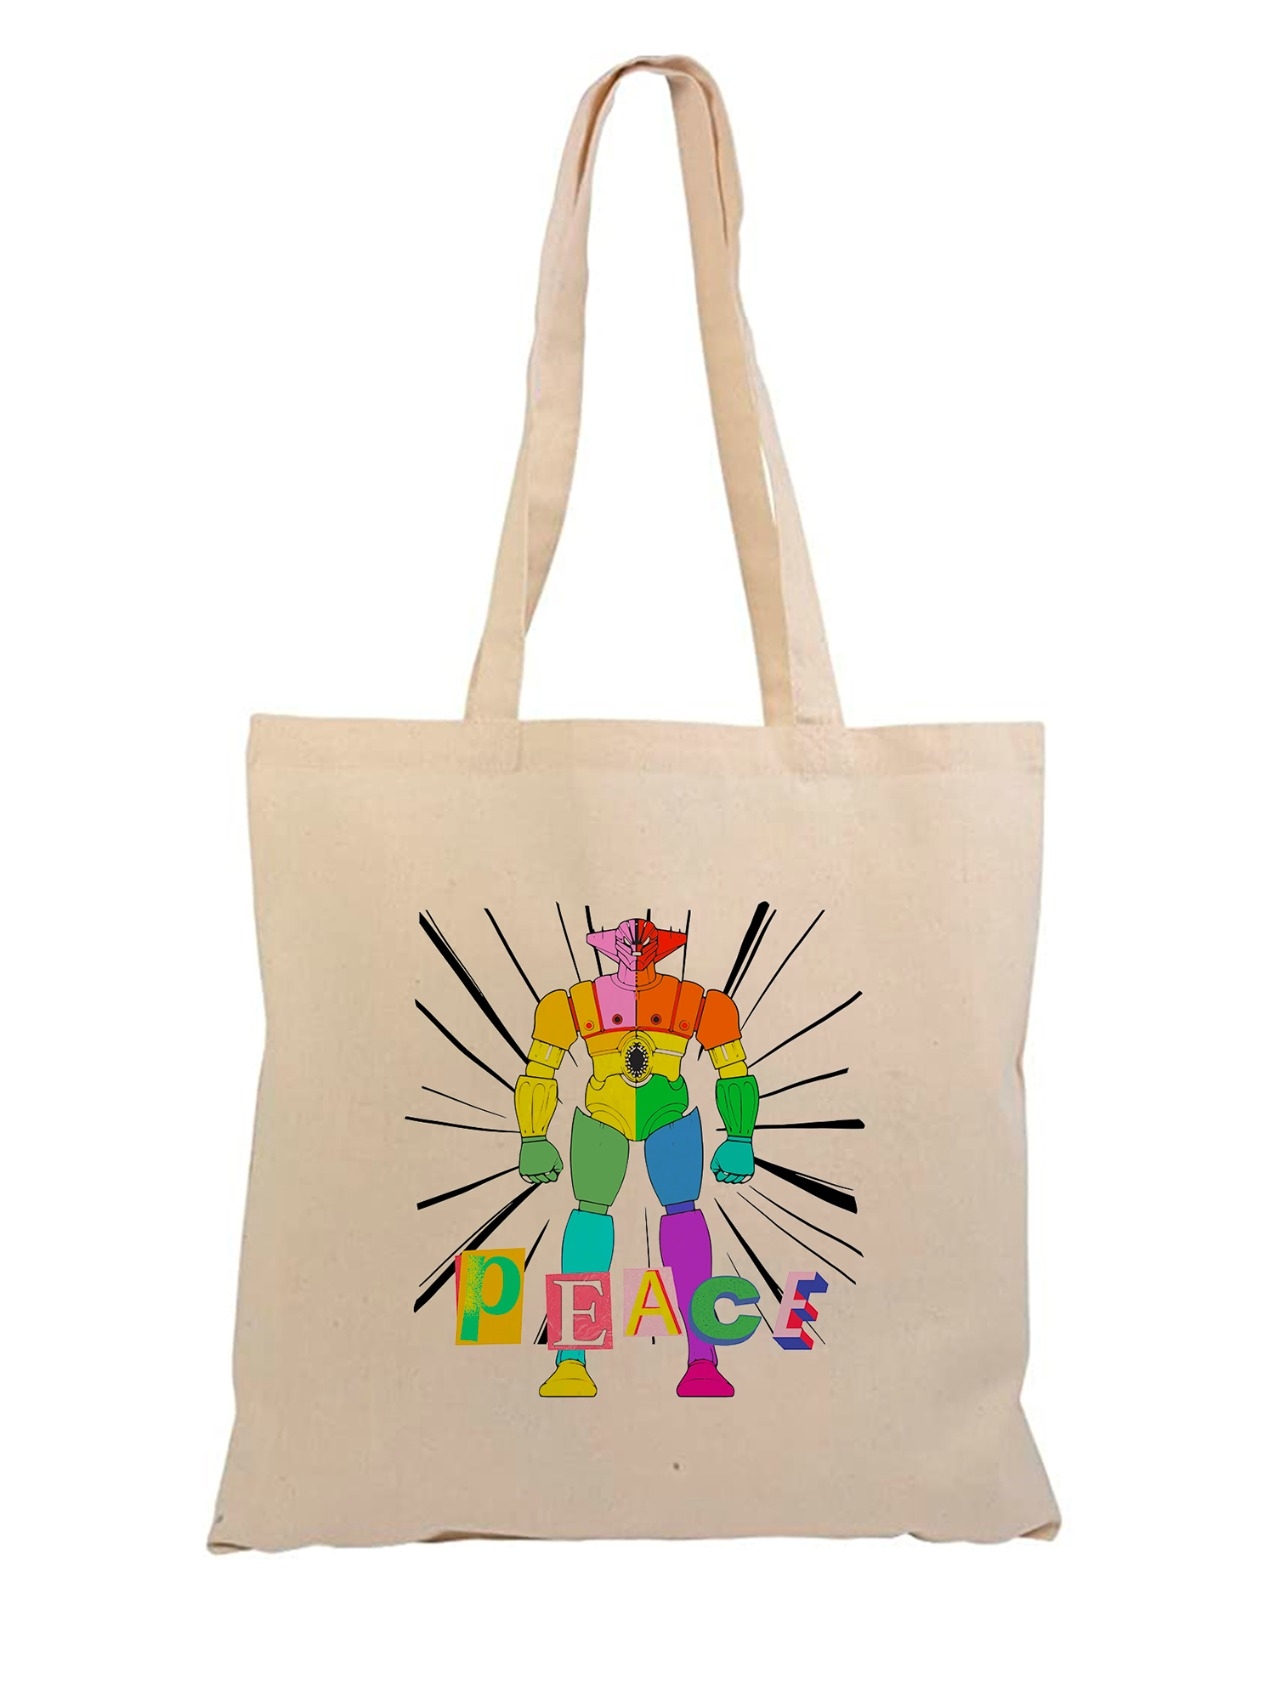 Jeeg Robot for Peace Shopping bag - Design Week 2023 special edition